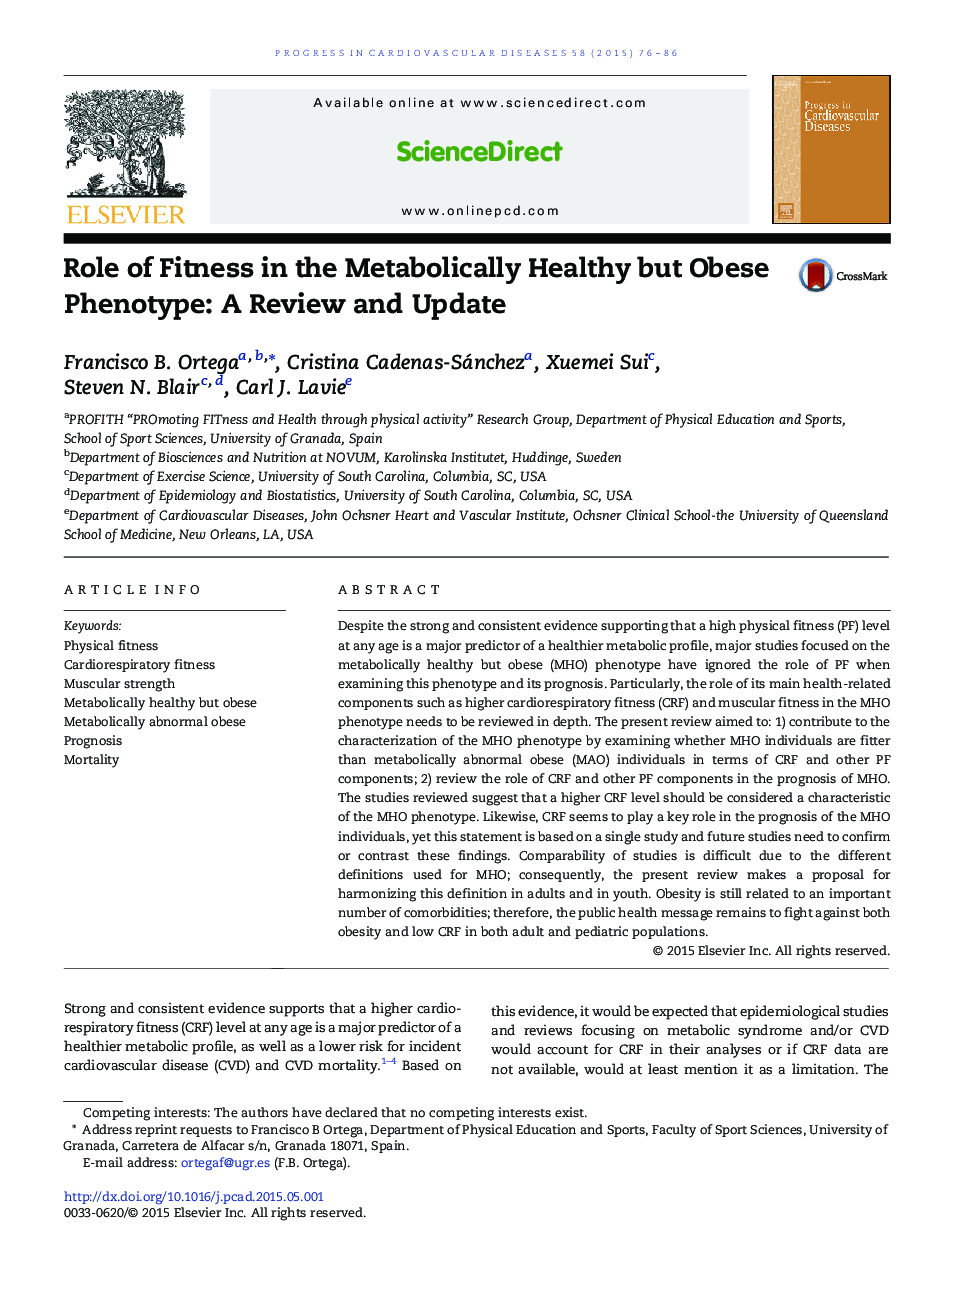 Role of Fitness in the Metabolically Healthy but Obese Phenotype: A Review and Update 